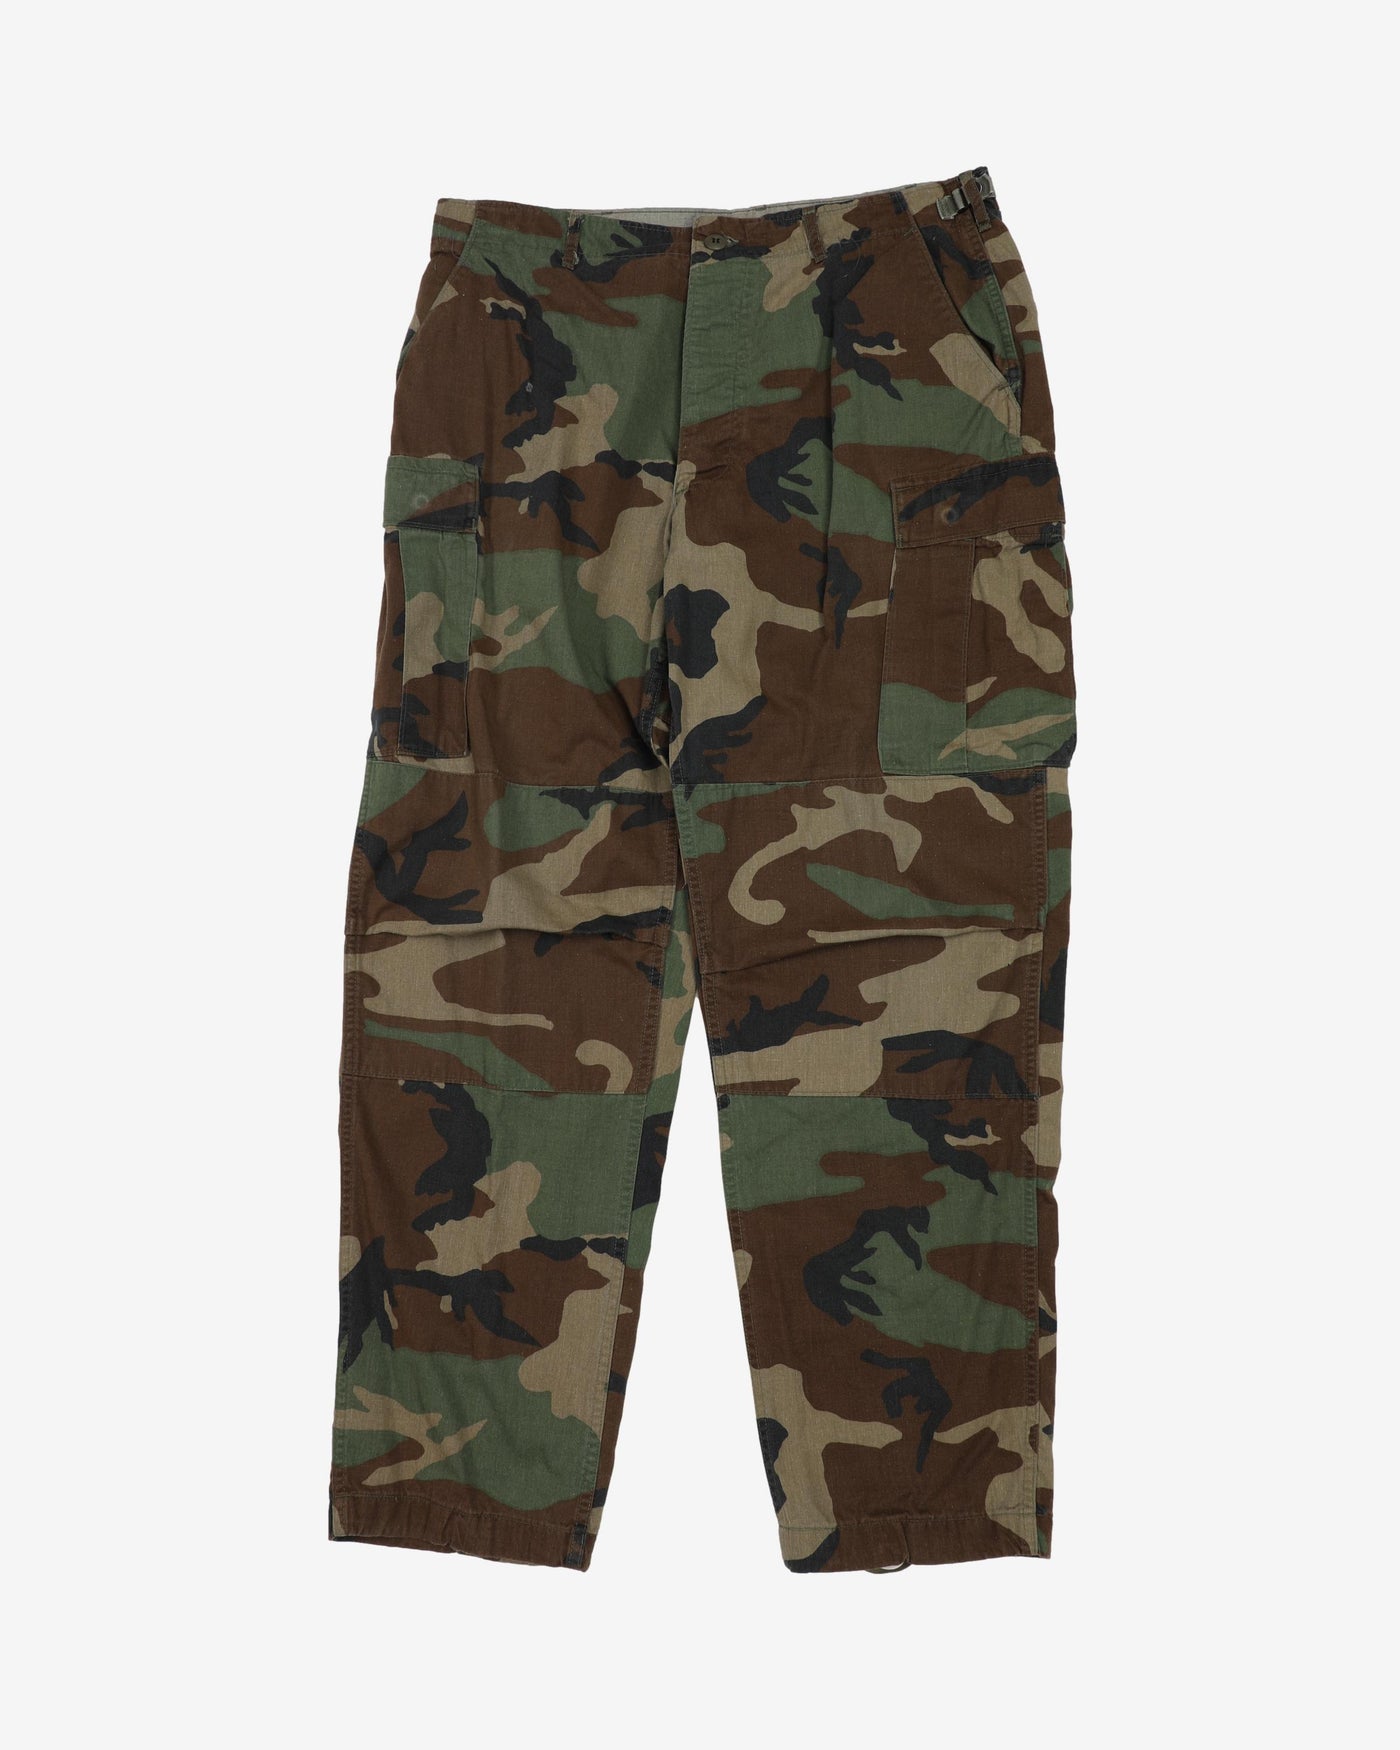 1990s Vintage US Army Woodland Camo BDU Combat Trousers - 34x32